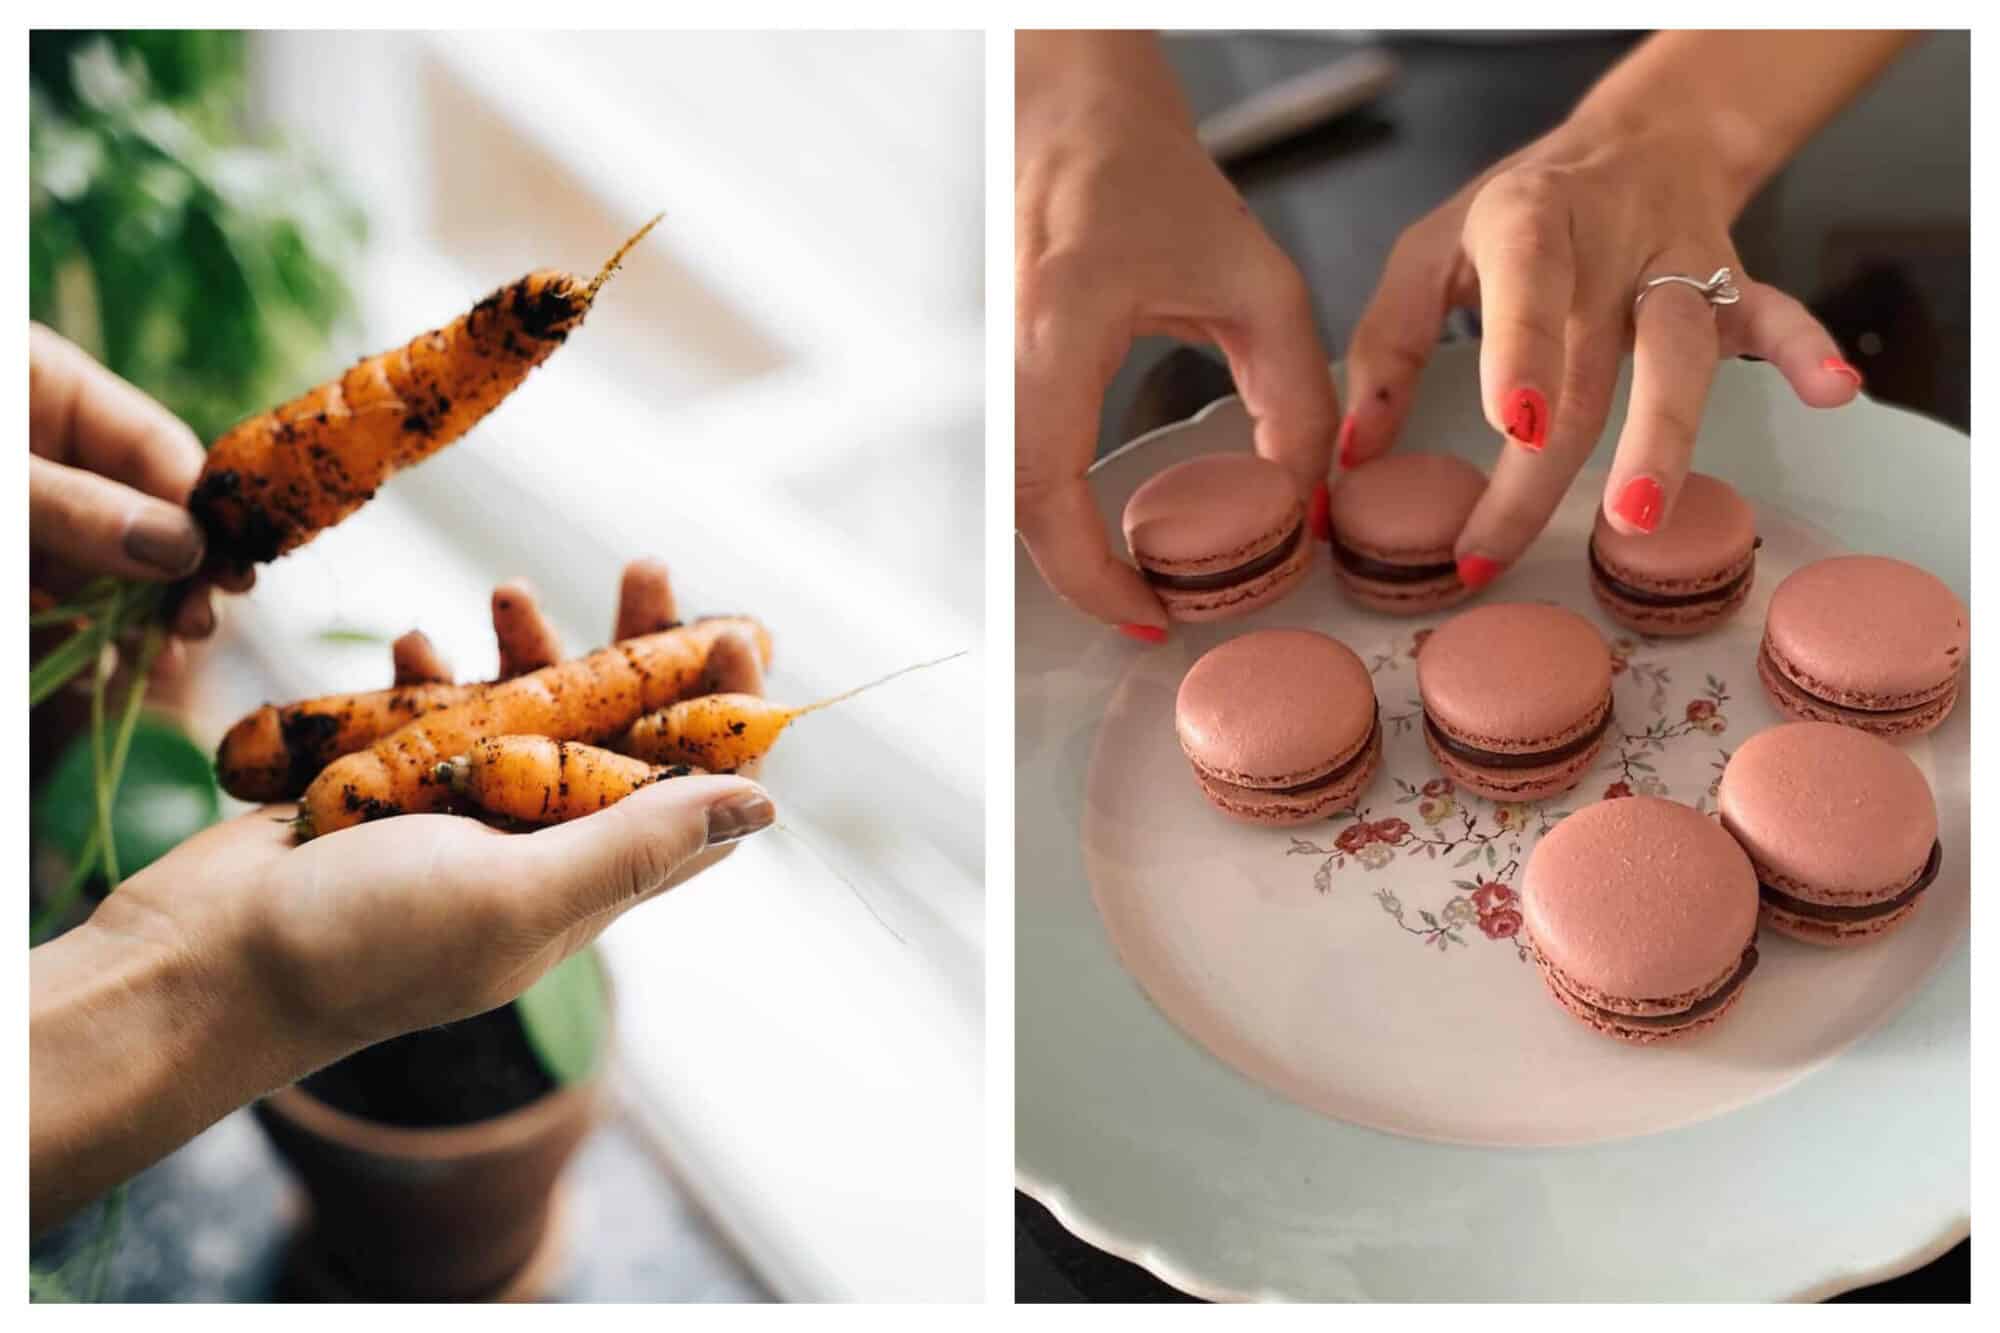 Left: A person holds four freshly harvested carrots, with dirt still visible on each of them, Right: A person delicately plates a batch of freshly baked macarons, which have pink cookies and a chocolate filling. 